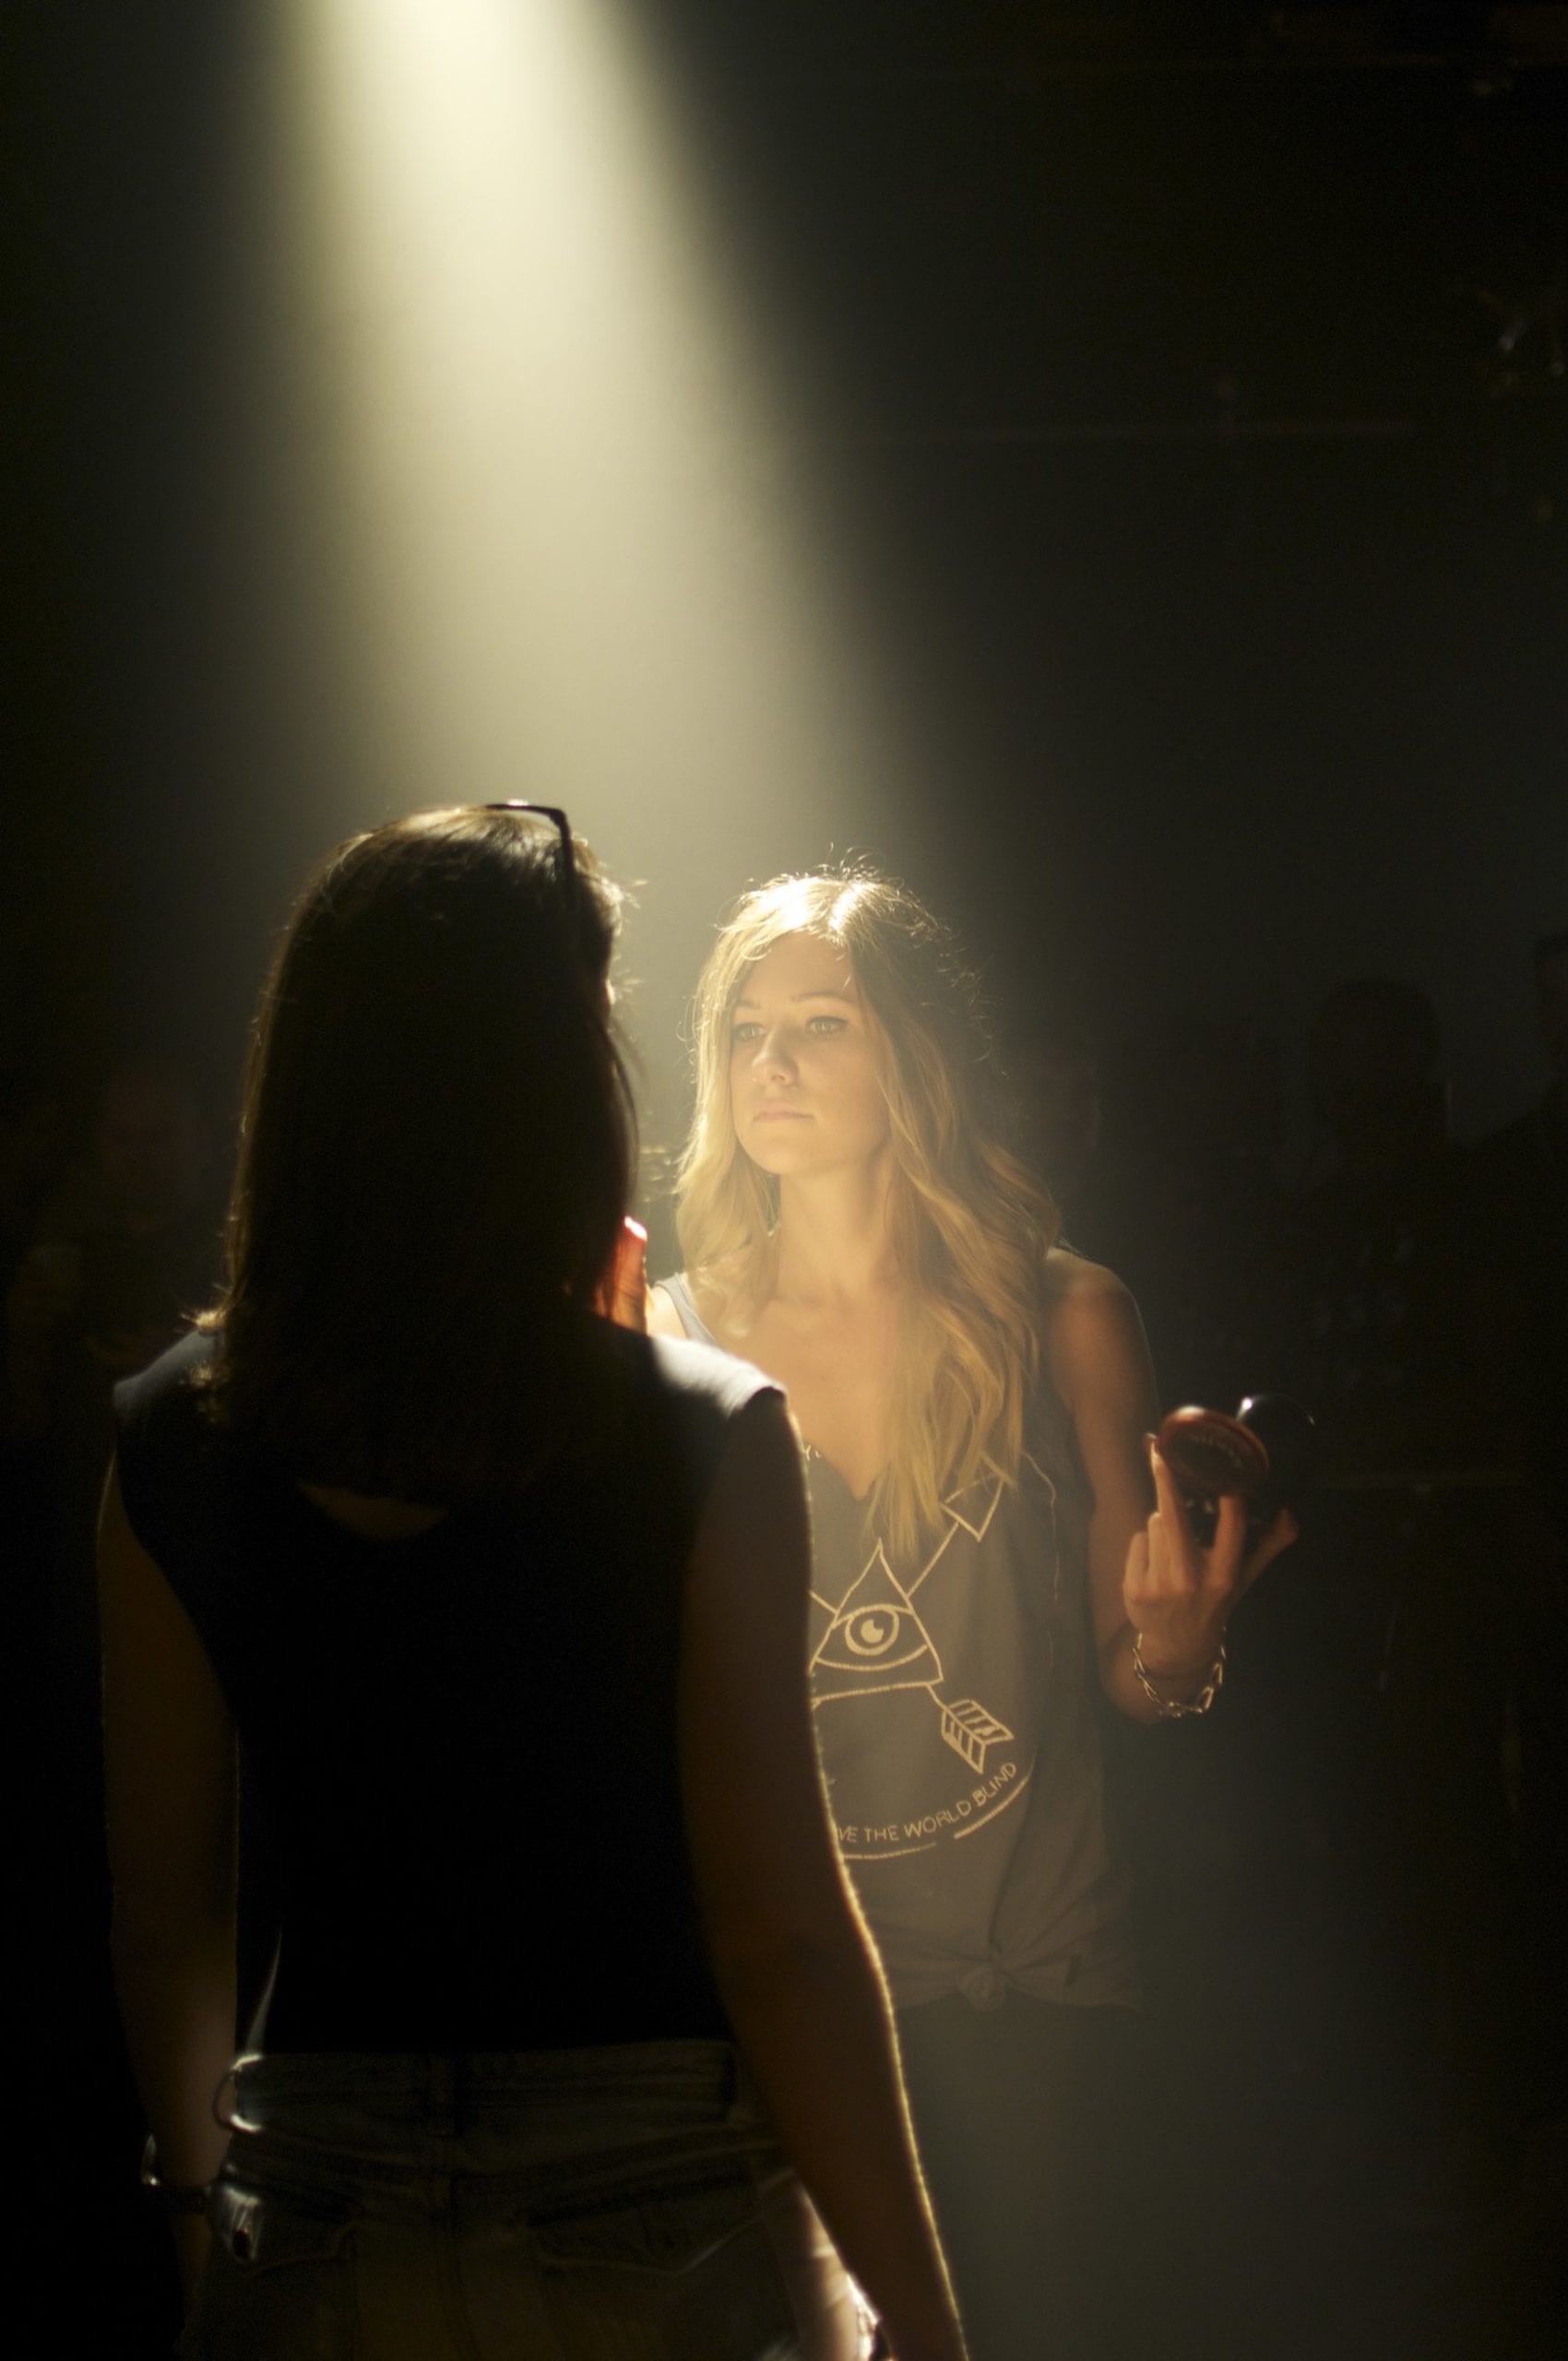 Makeup artist with long blond hair applying makeup to a model in a studio with a yellowish light shining on them